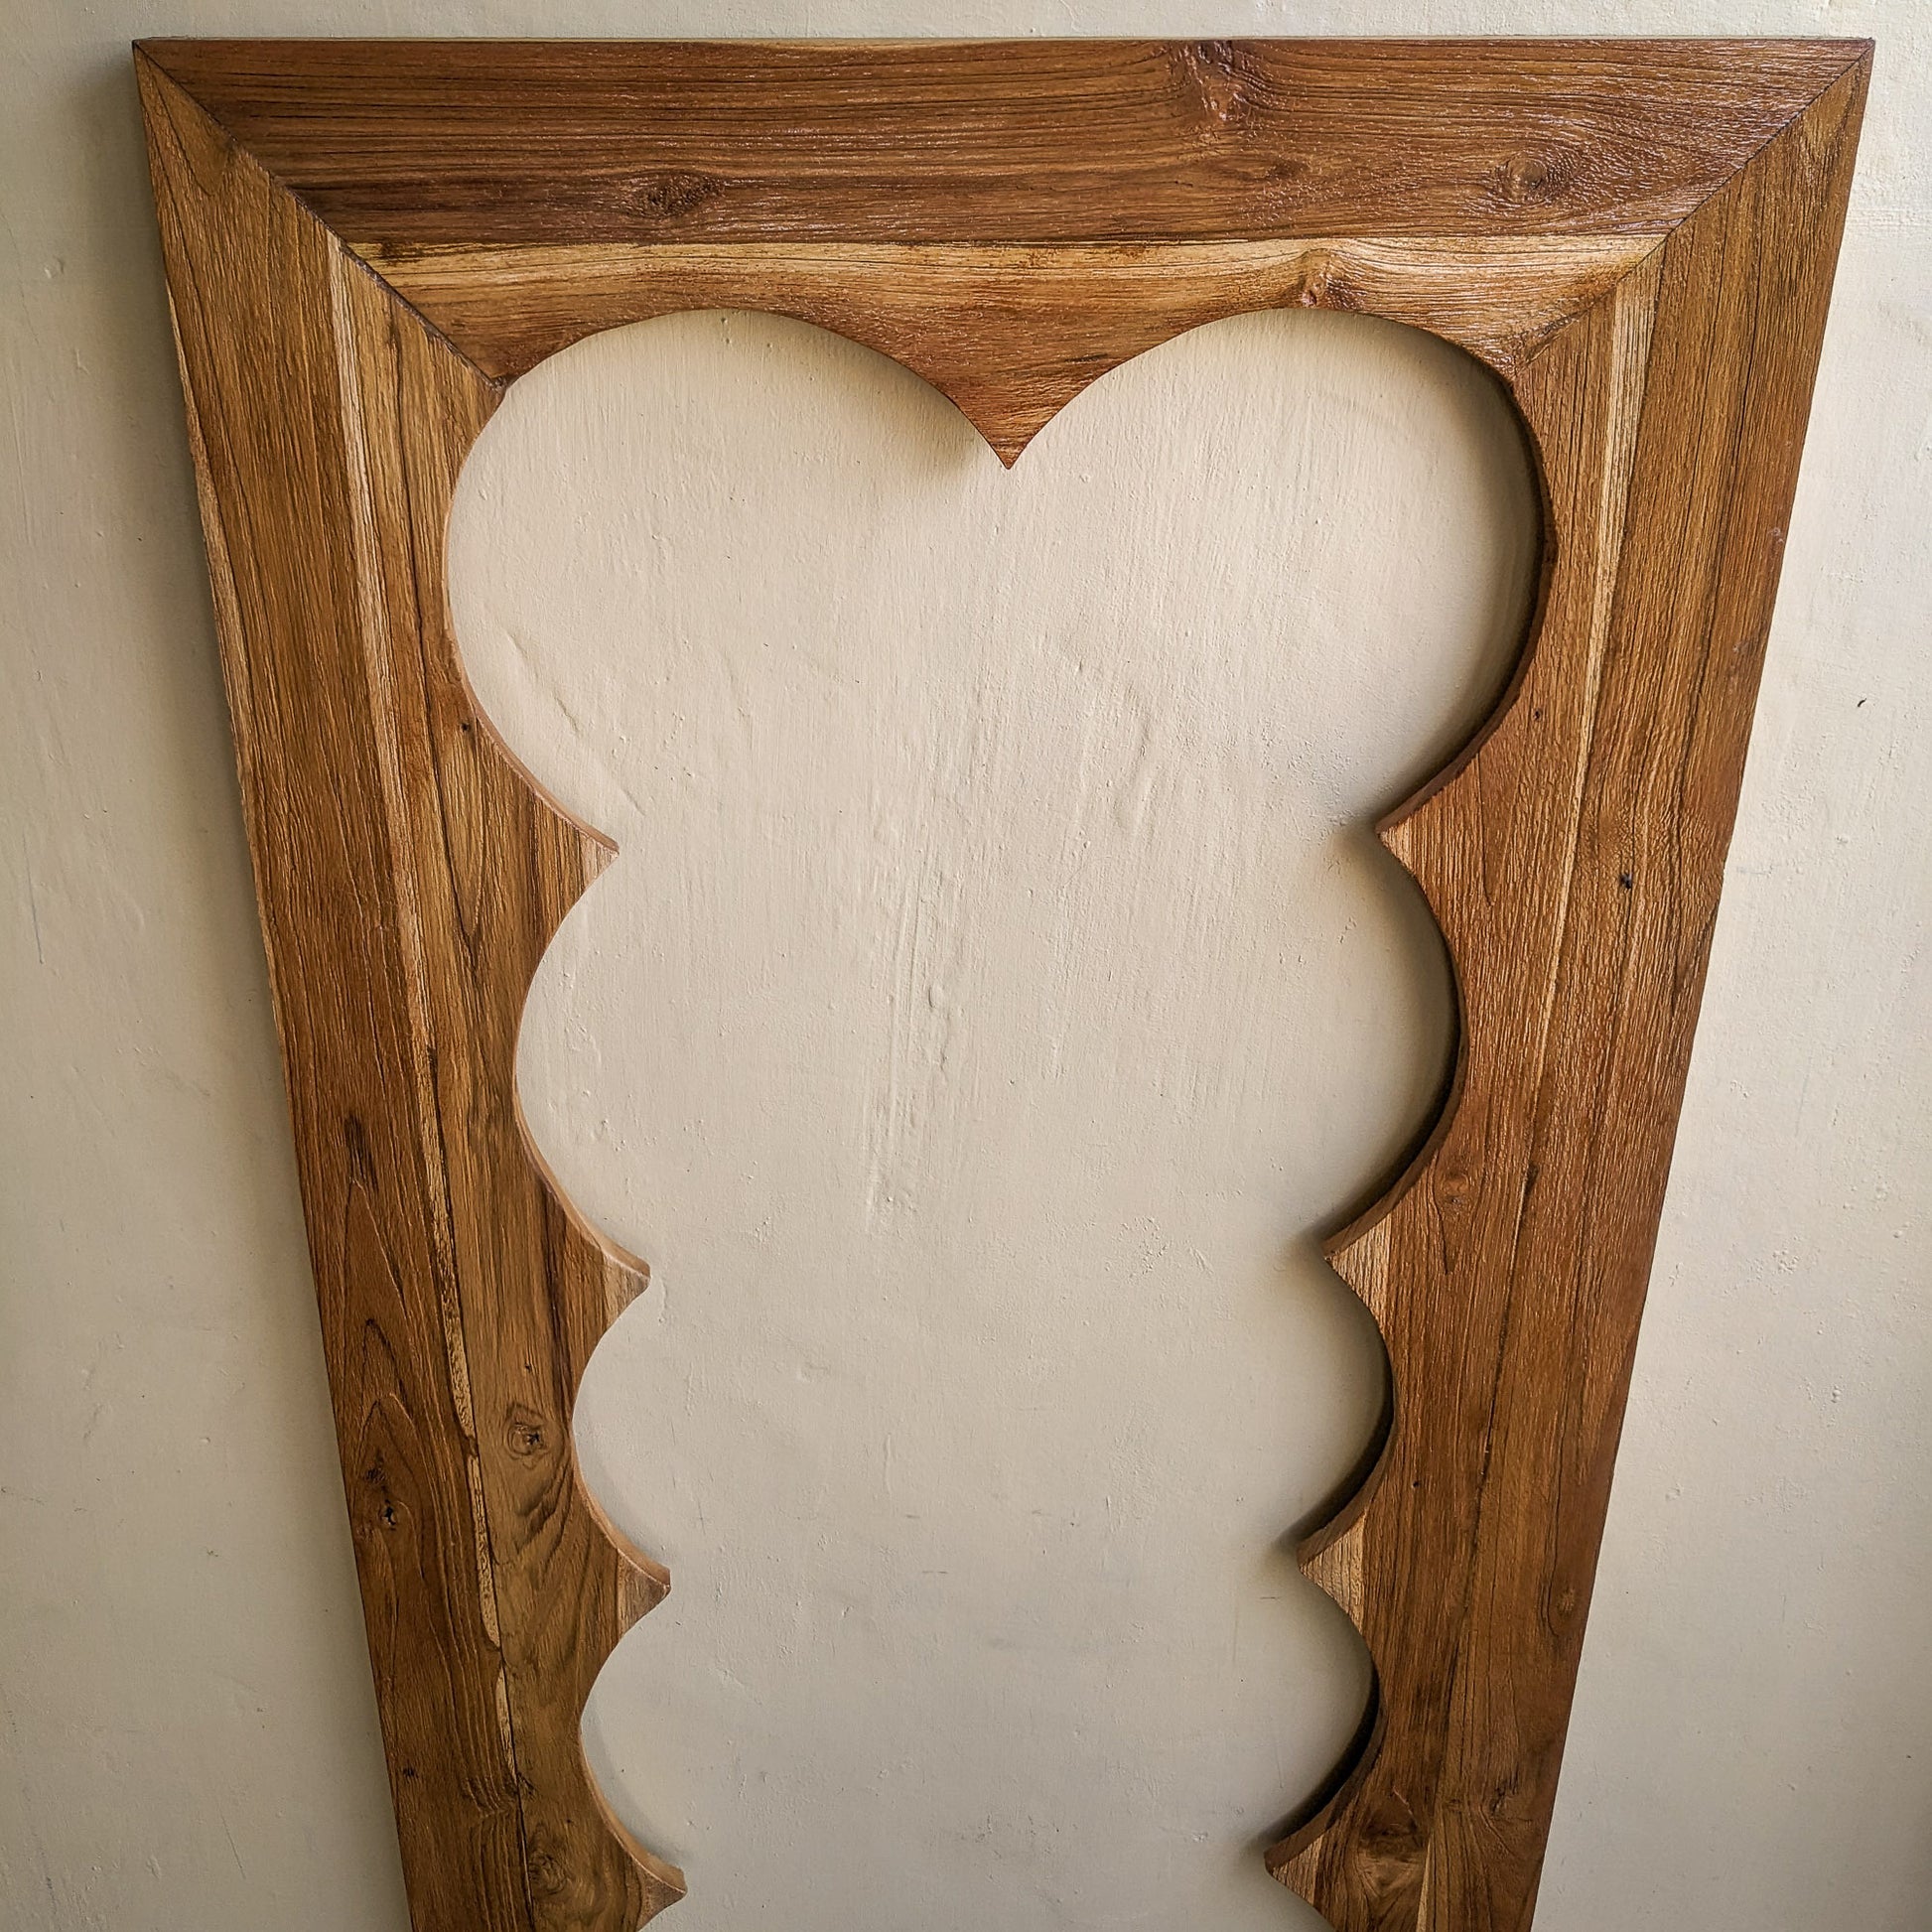 Wooden Hand Carved Decorative Wall Mirror Frame for Bedroom